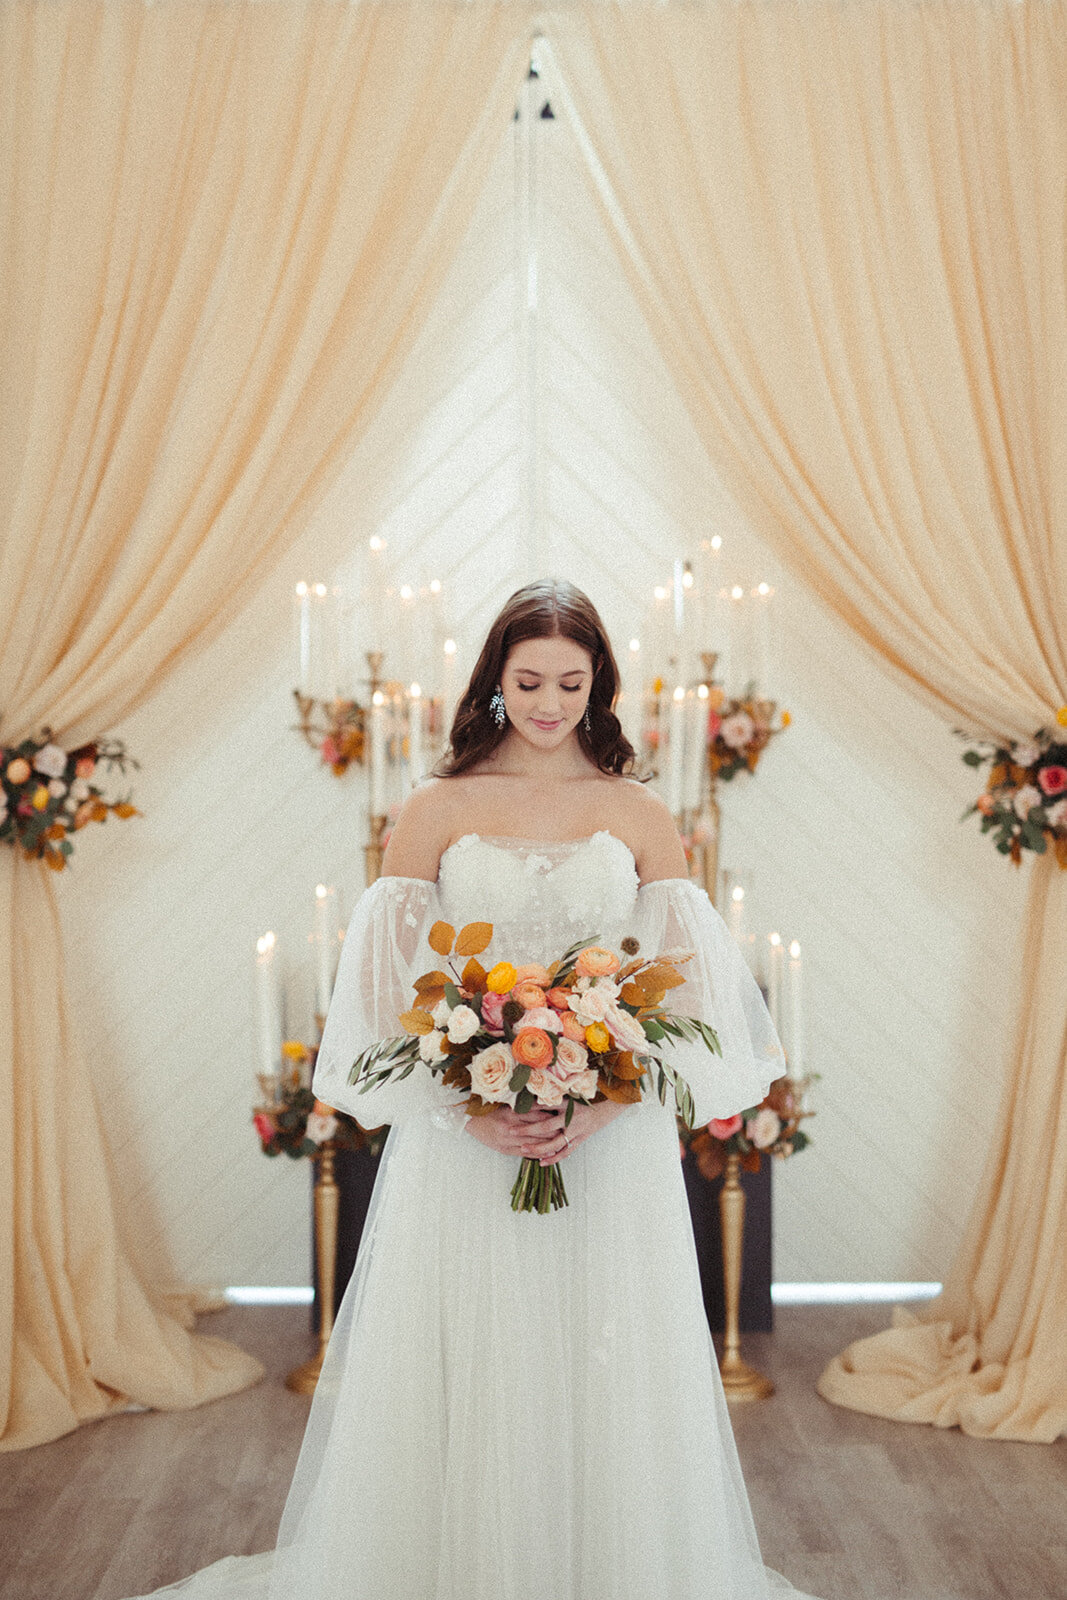 A bride wearing a white wedding gown looks down at her bouquet in a light and airy room filled with candlesticks.